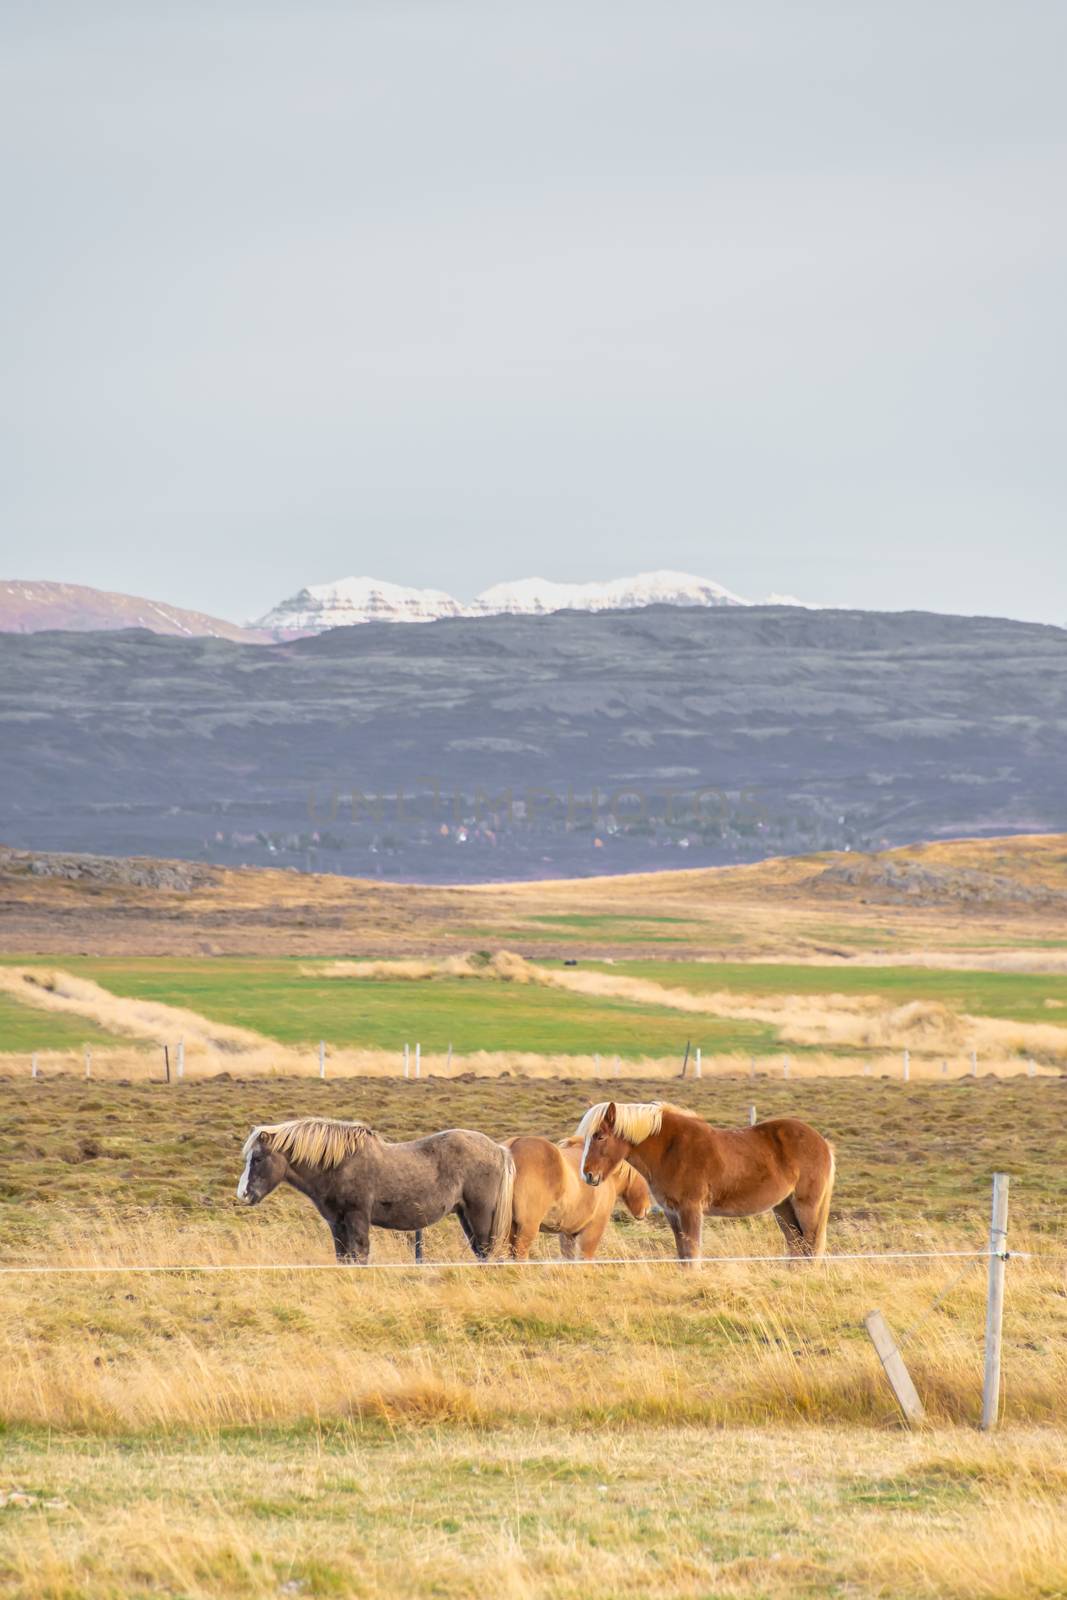 Snaefellsness national park in Iceland icelandic horses standing on meadow in front of mountain range by MXW_Stock